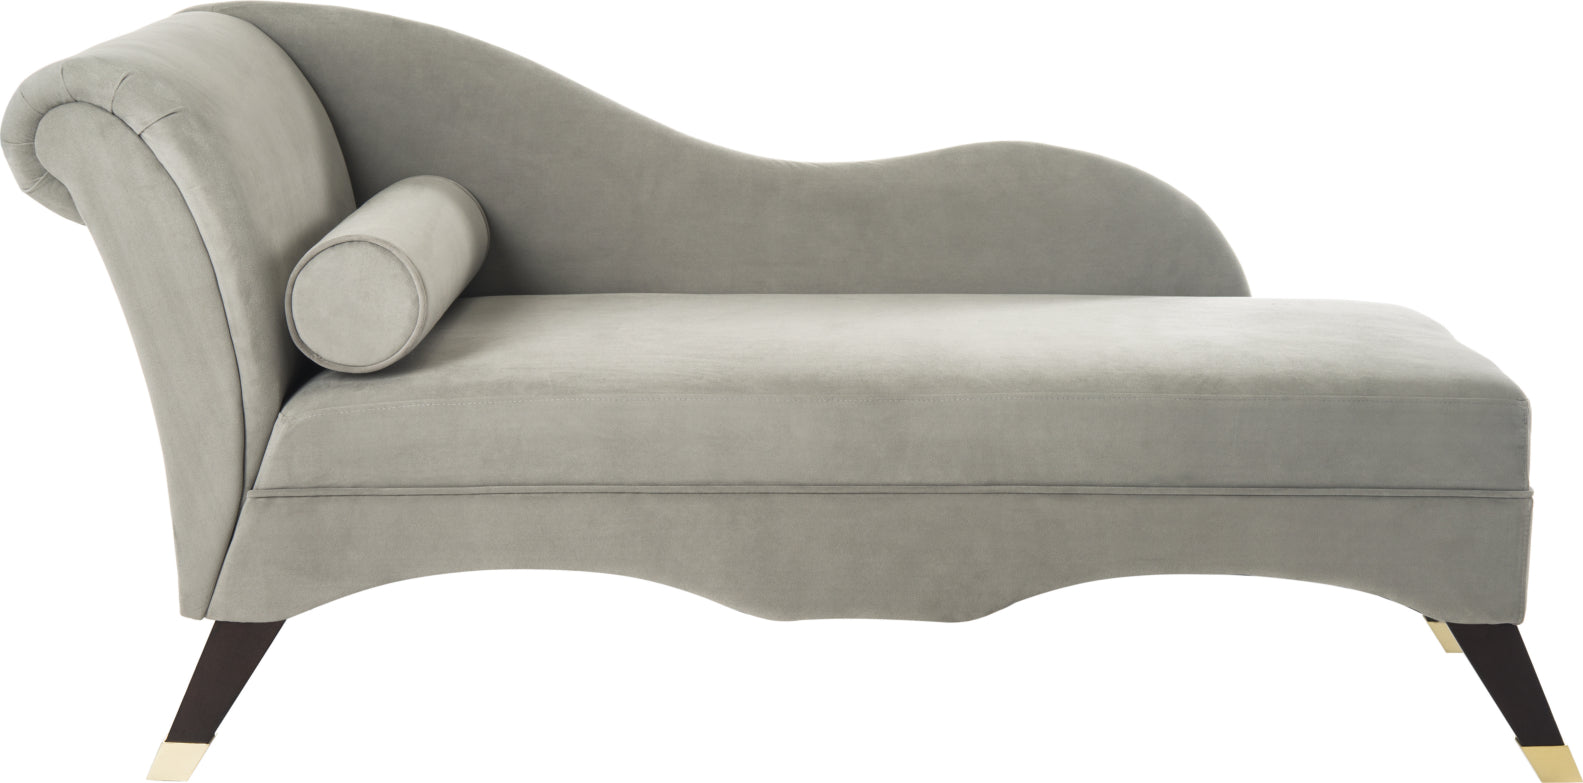 Safavieh Caiden Velvet Chaise With Pillow Grey and Espresso Furniture main image